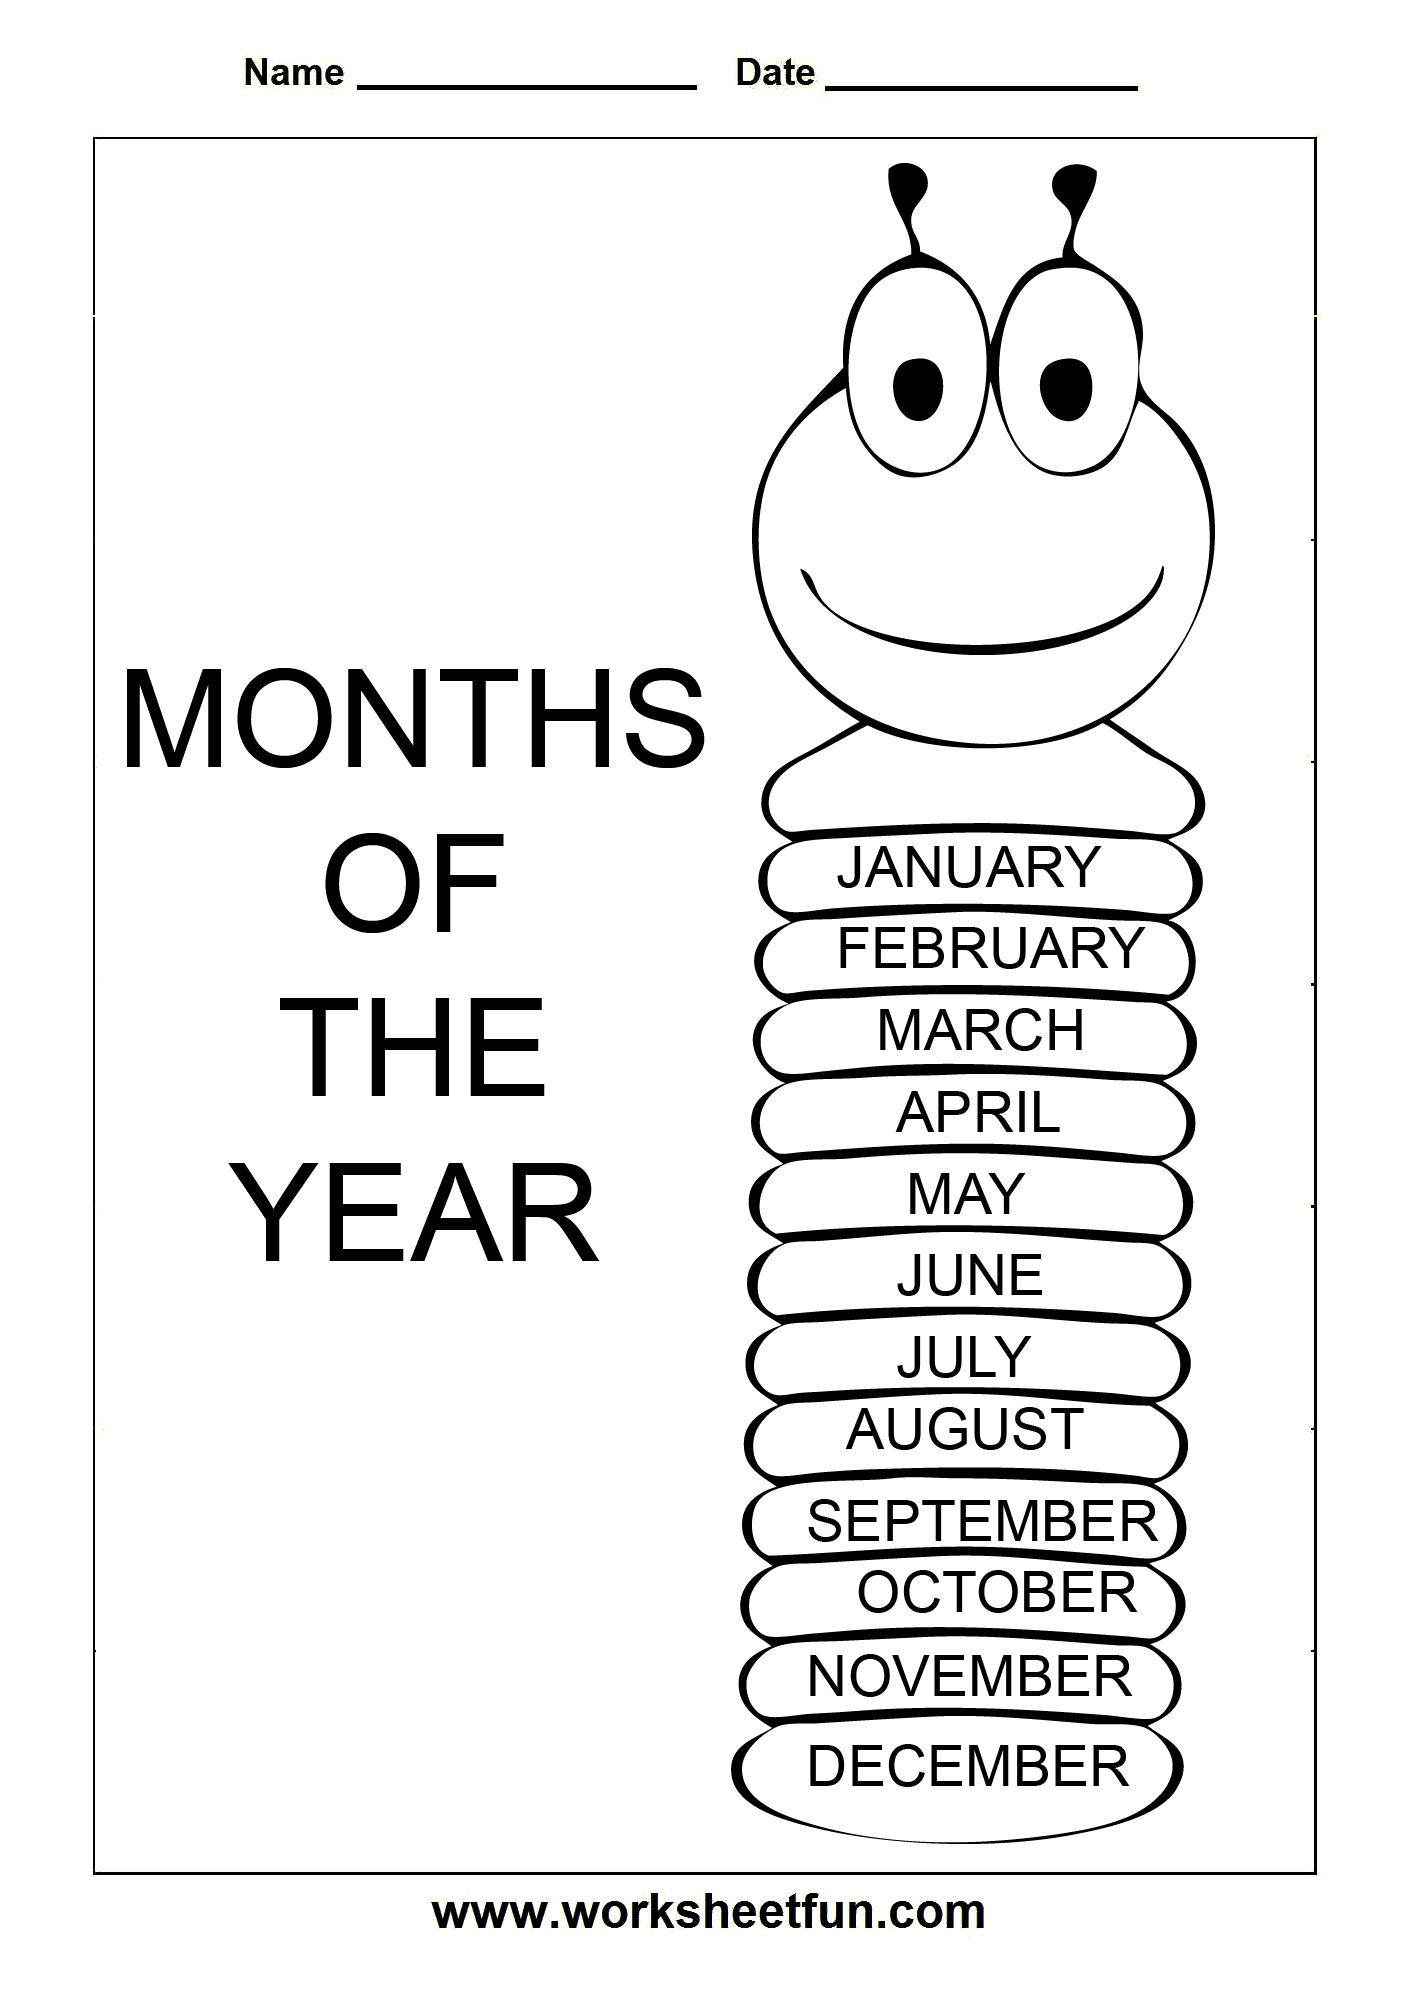 Worksheet : Months Of The Year Free Printable Worksheets L Spelling - Free Printable Spelling Worksheets For Adults